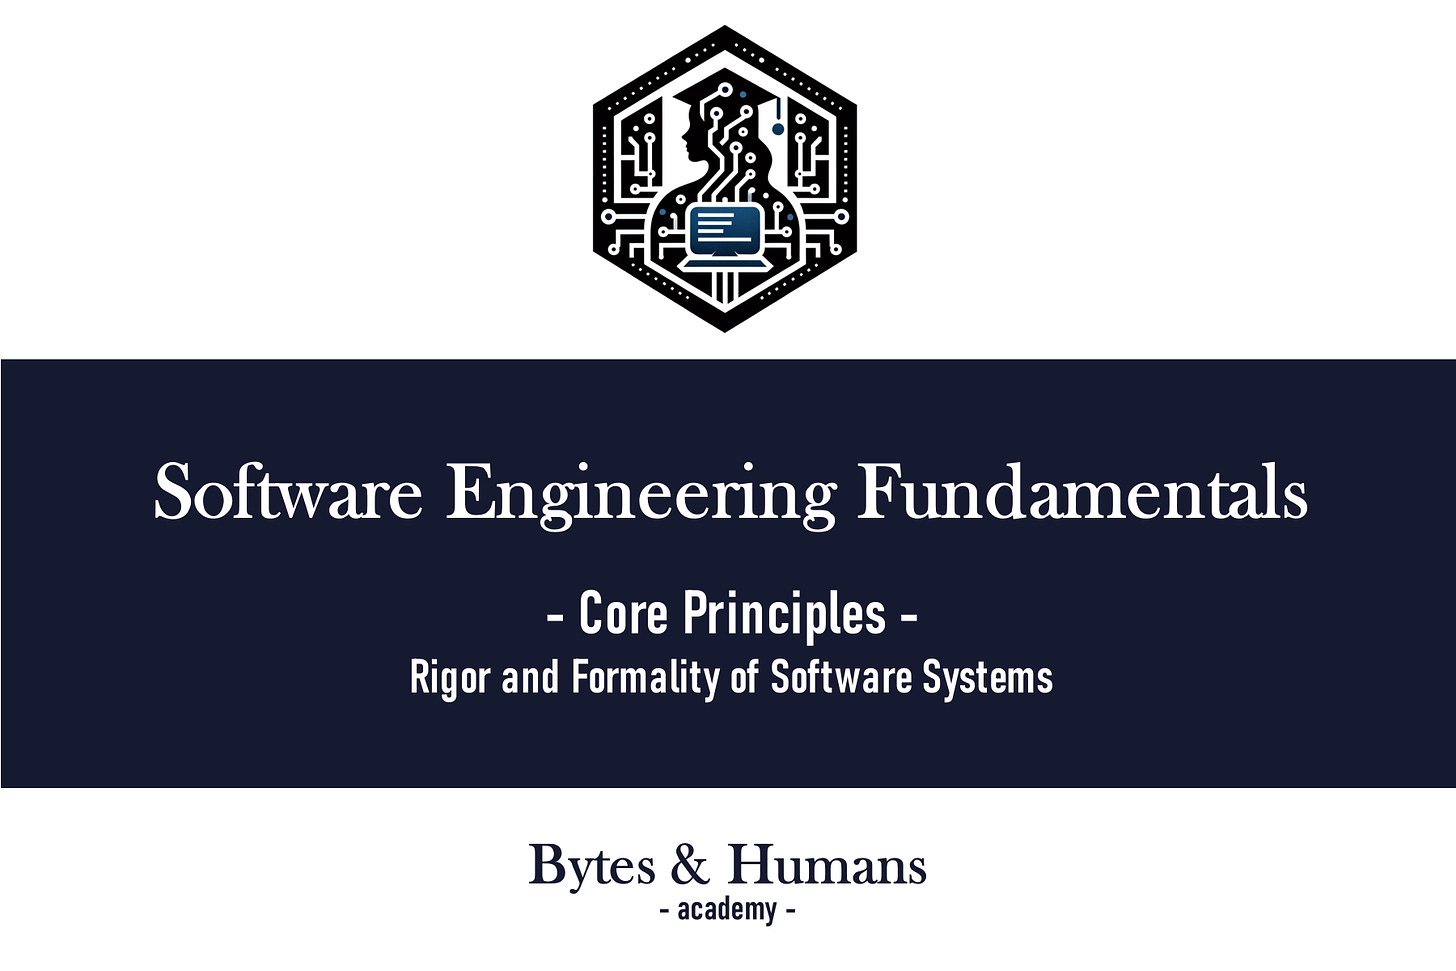 Bytes & Humans Academy Release #6 from Software Engineering Fundamentals - Core Principles: Rigor and Formality of Software Systems | Bytes & Humans Academy